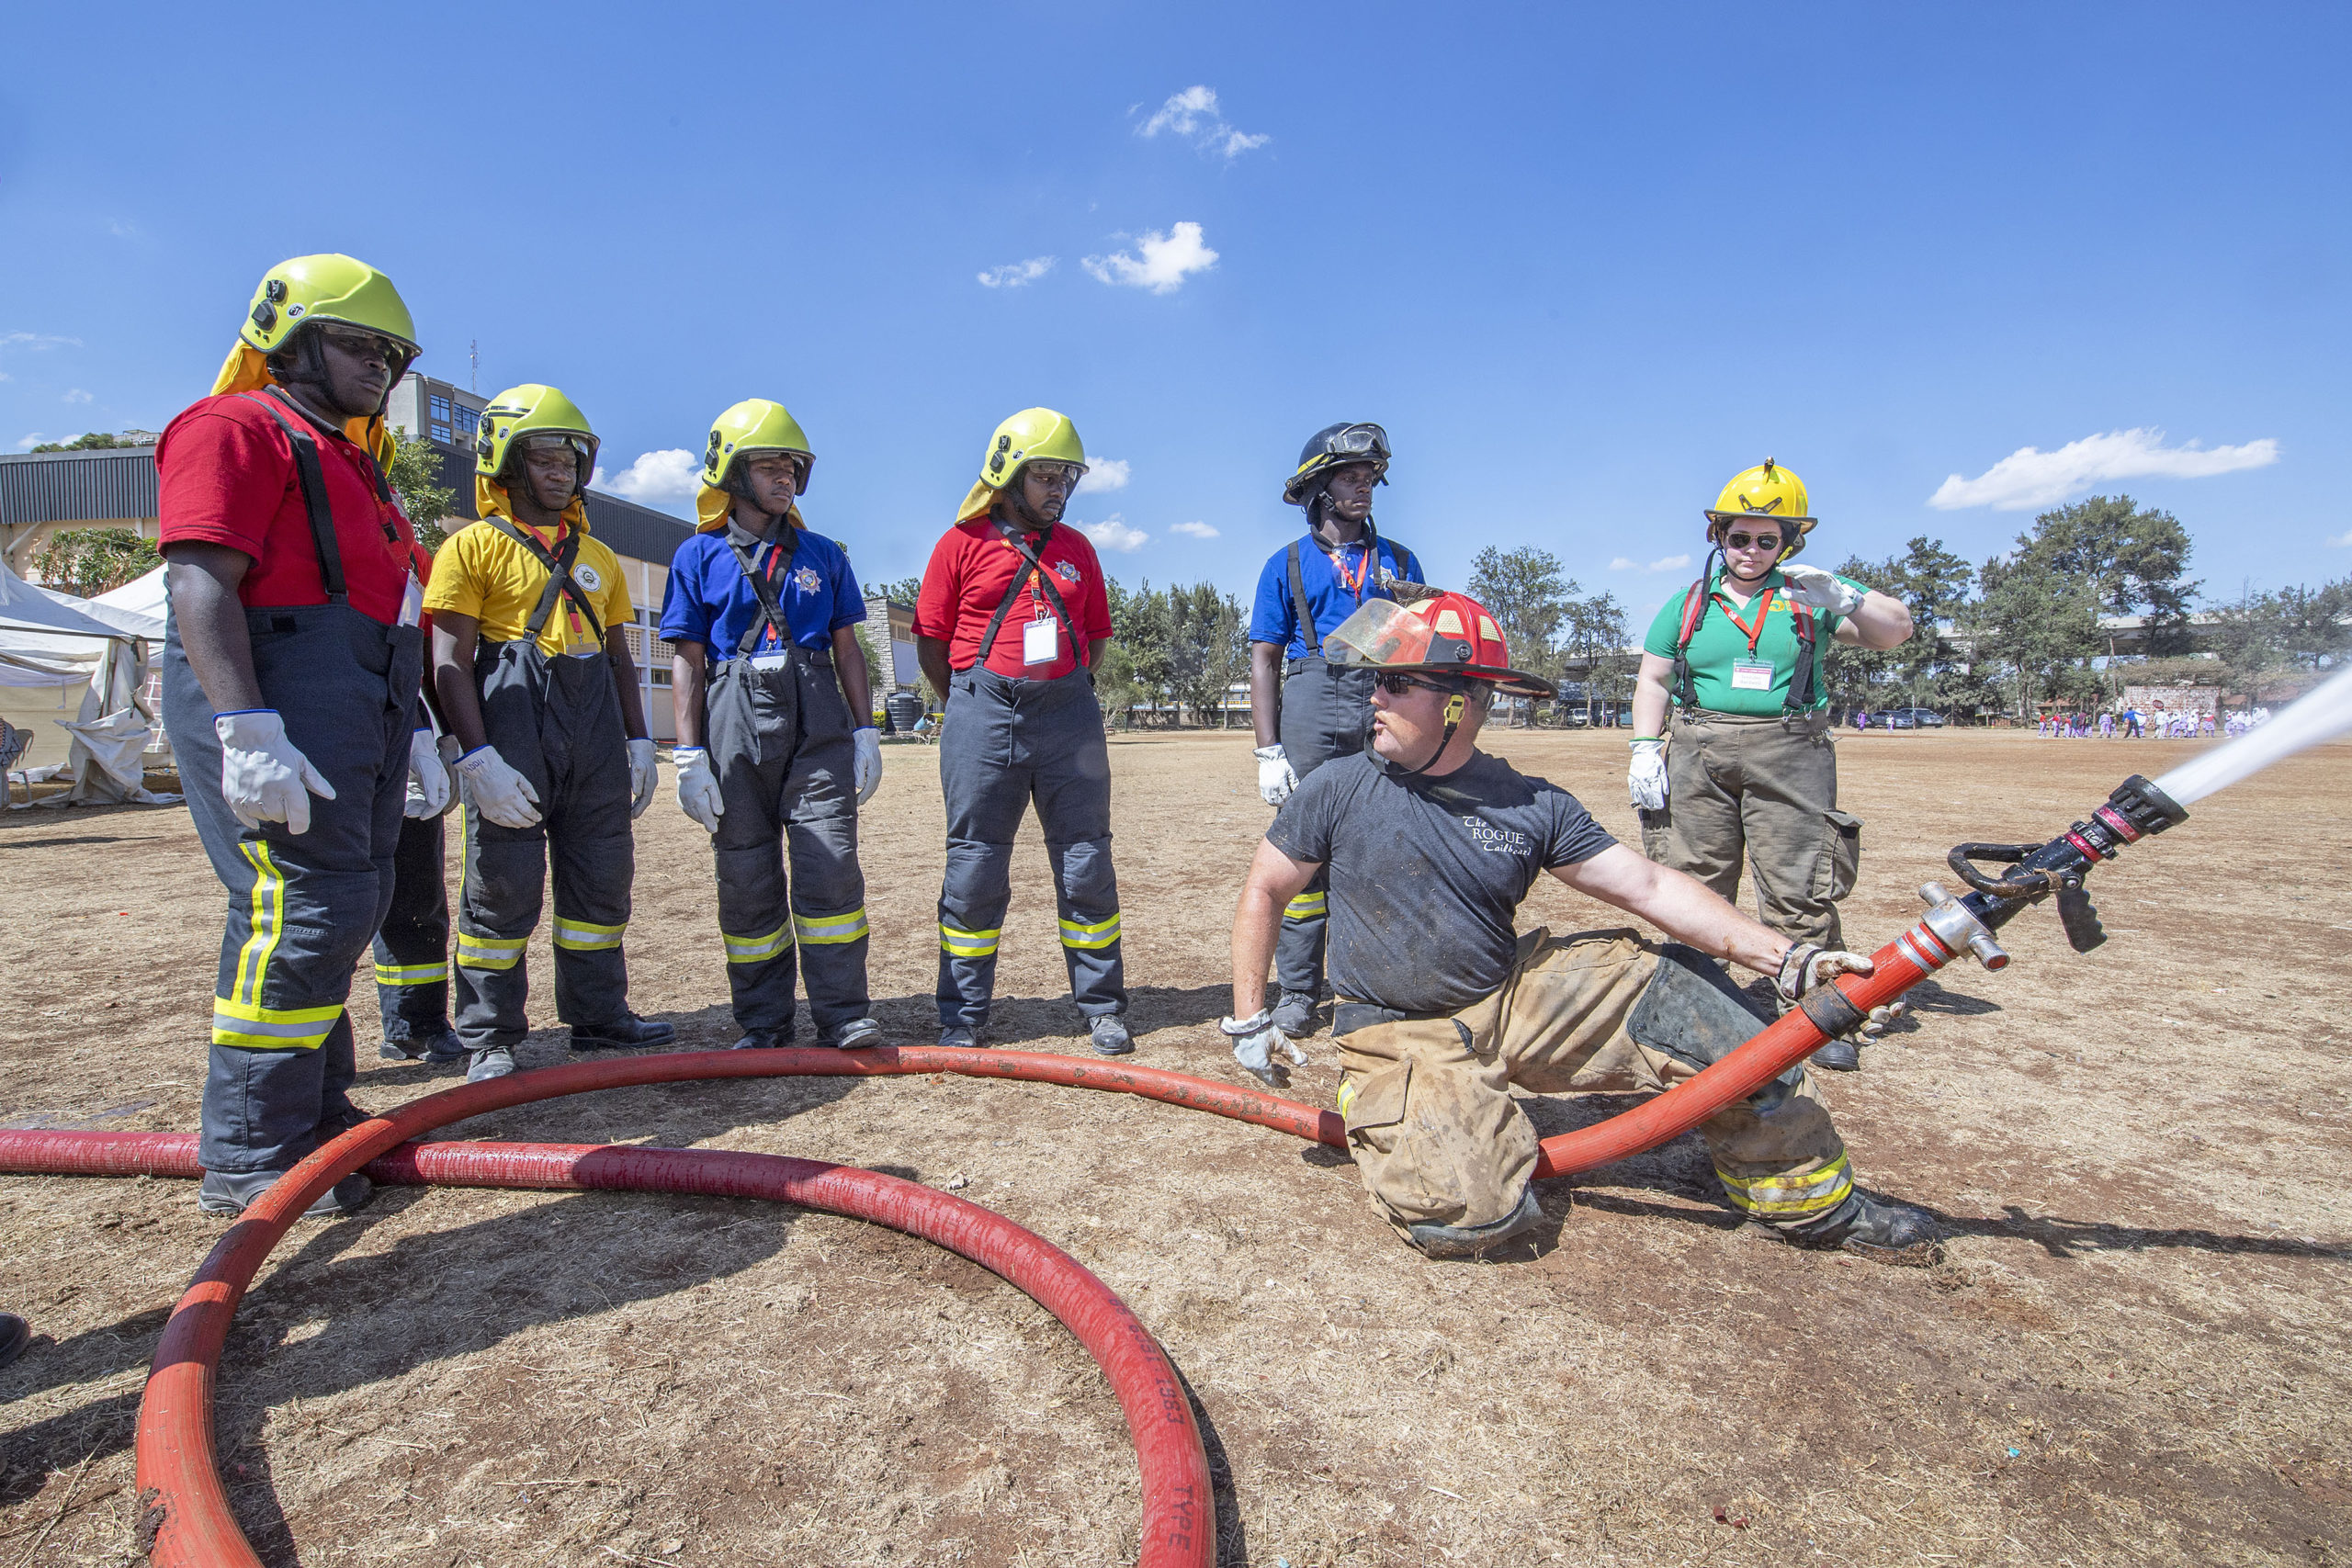 Texas firefighter John Moore gives advice on hose-handling techniques to Kenyan firefighters during the Africa Fire Mission trip to Nairobi, Kenya in November.